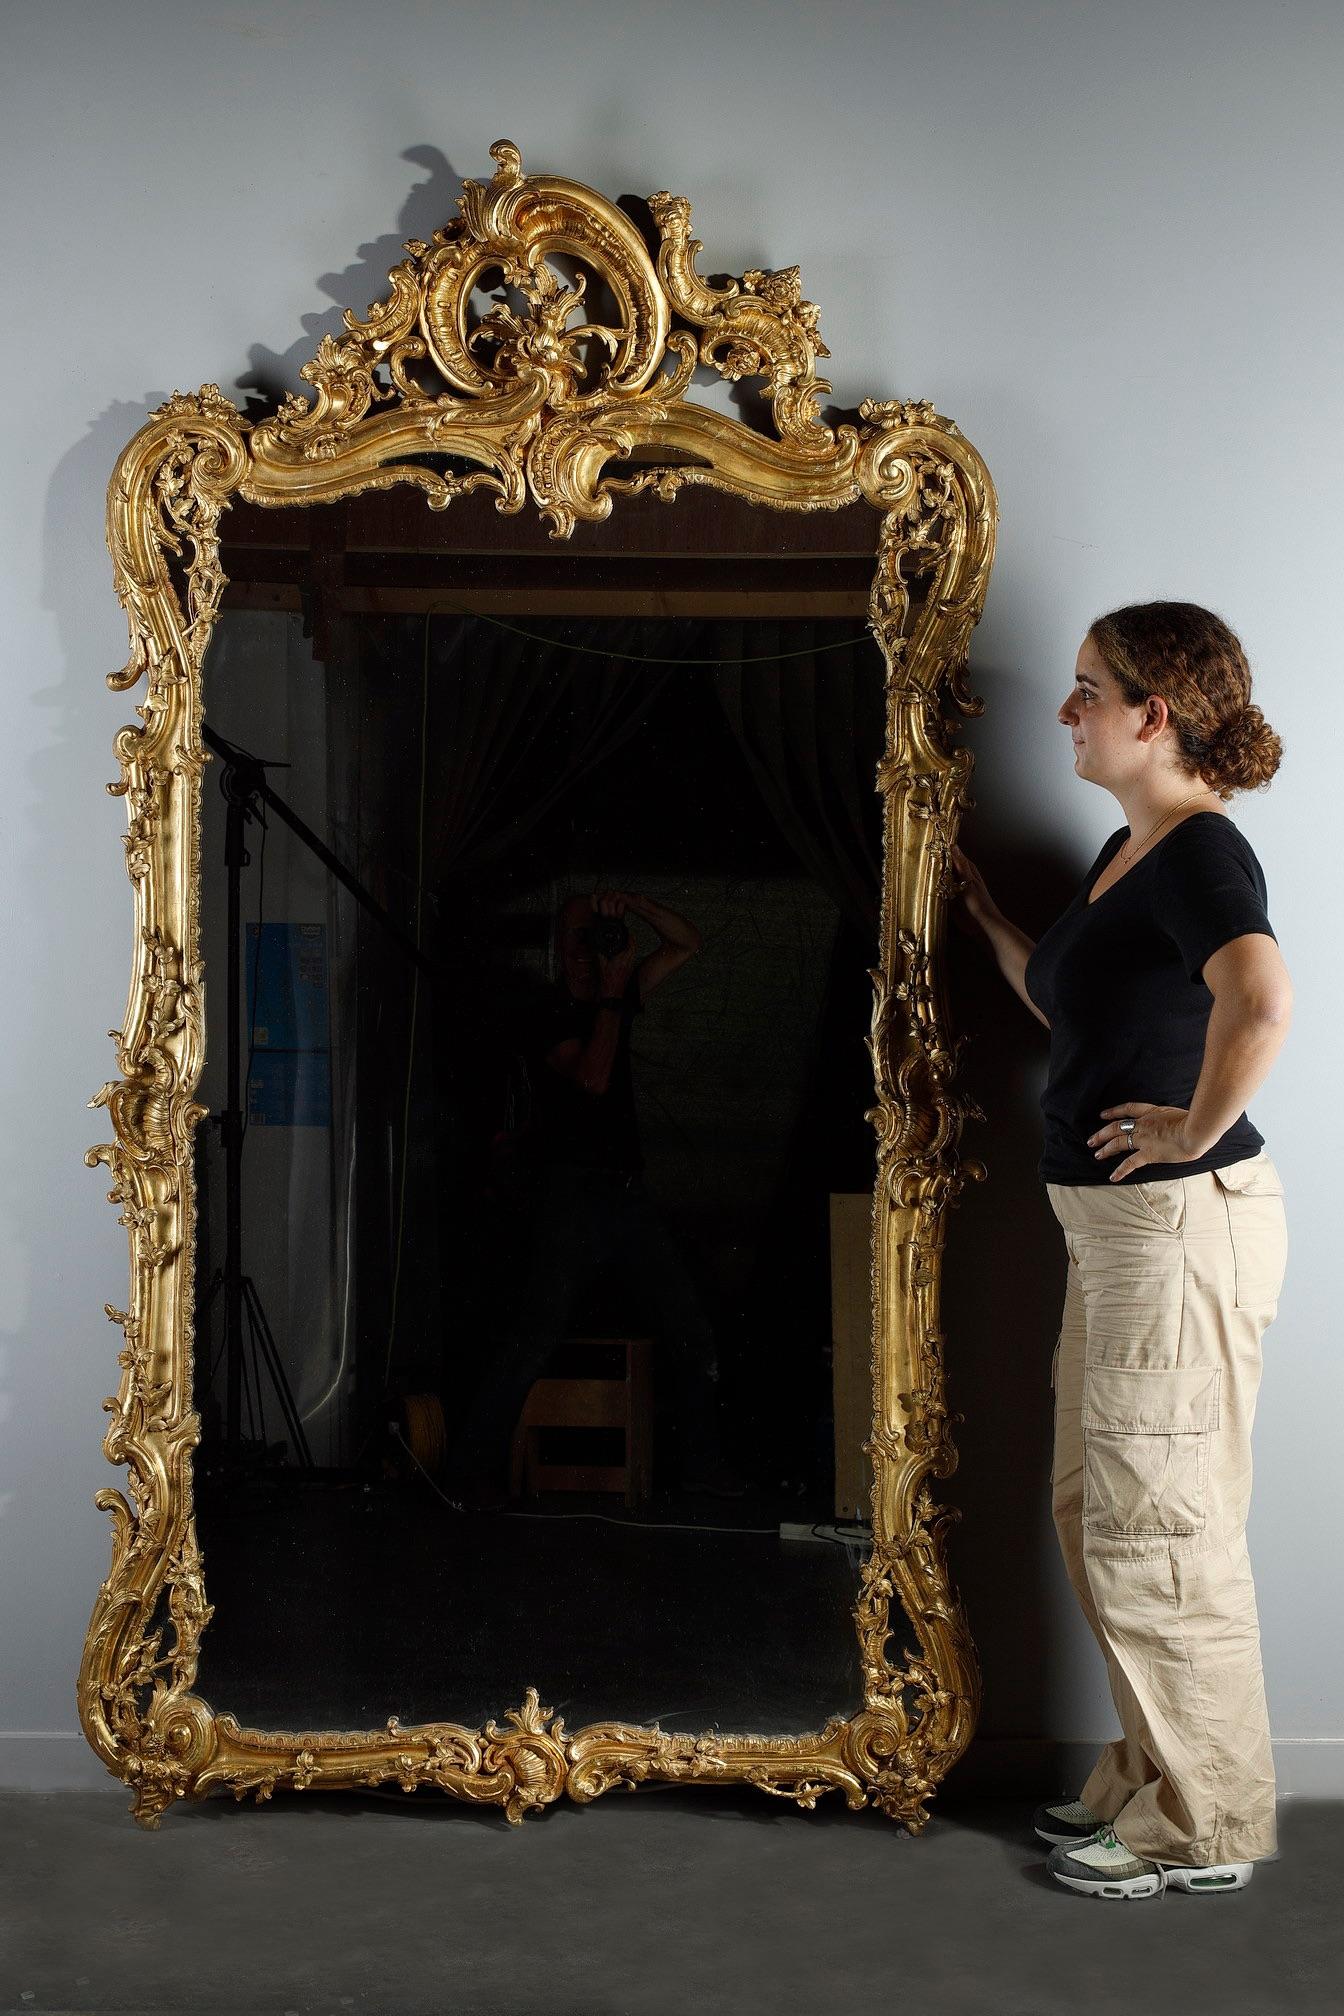 Large giltwood Rocaille mirror in Louis XV style, decorated with plant motifs of acanthus leaves, climbing ivy, flowers and shells. The large scrolls at the corners allow for mirror inlays making the composition of this rococo mirror very moving.